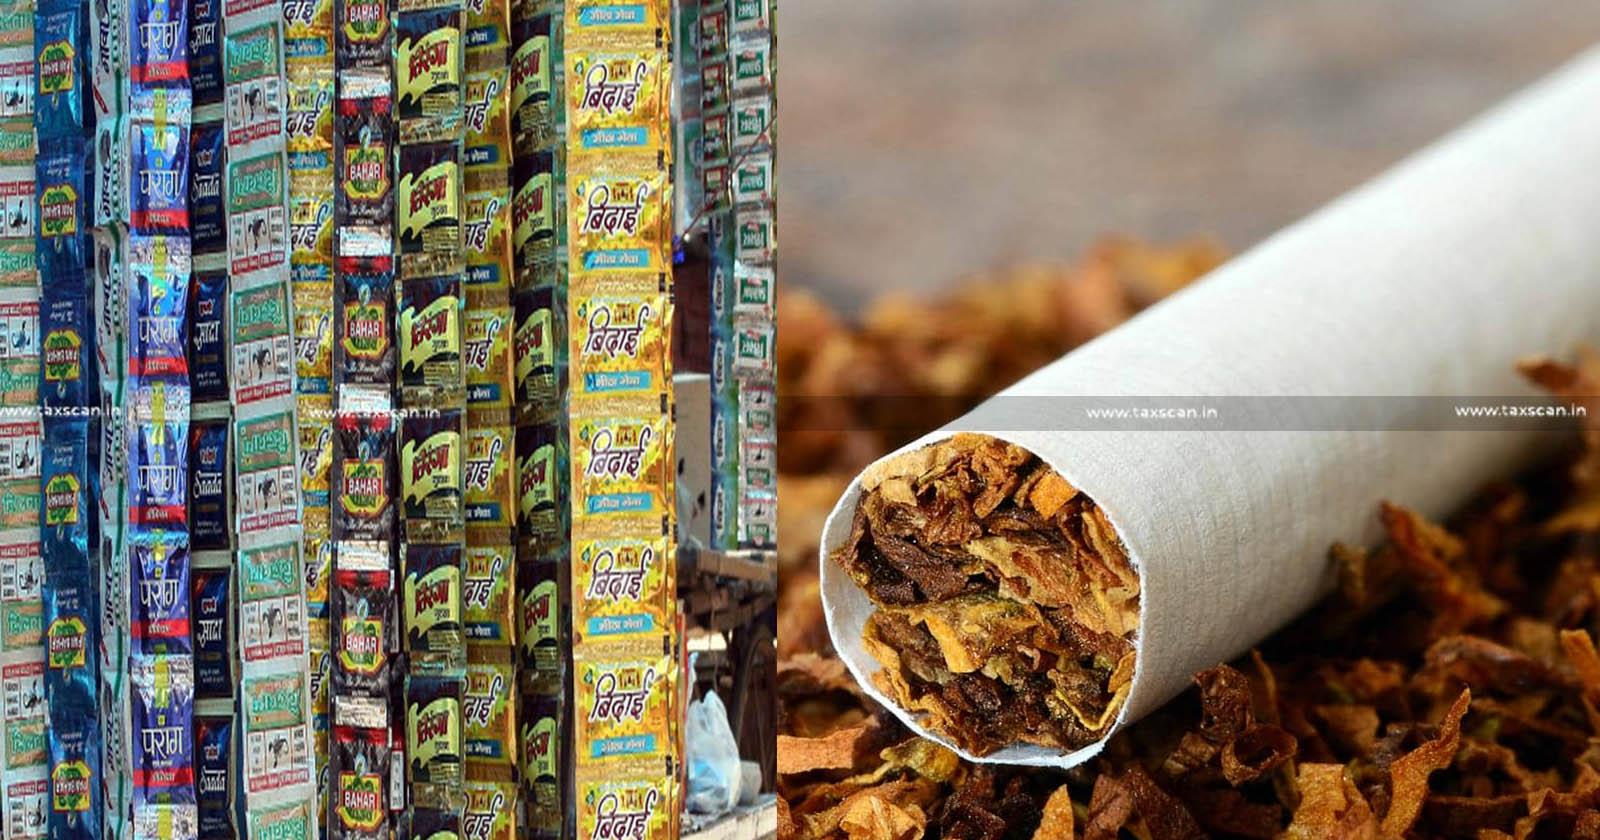 CESTAT - Excise Duty Demand - Manufacture - Clearance - Pan Masala - Tobacco - Real Manufacture-TAXSCAN